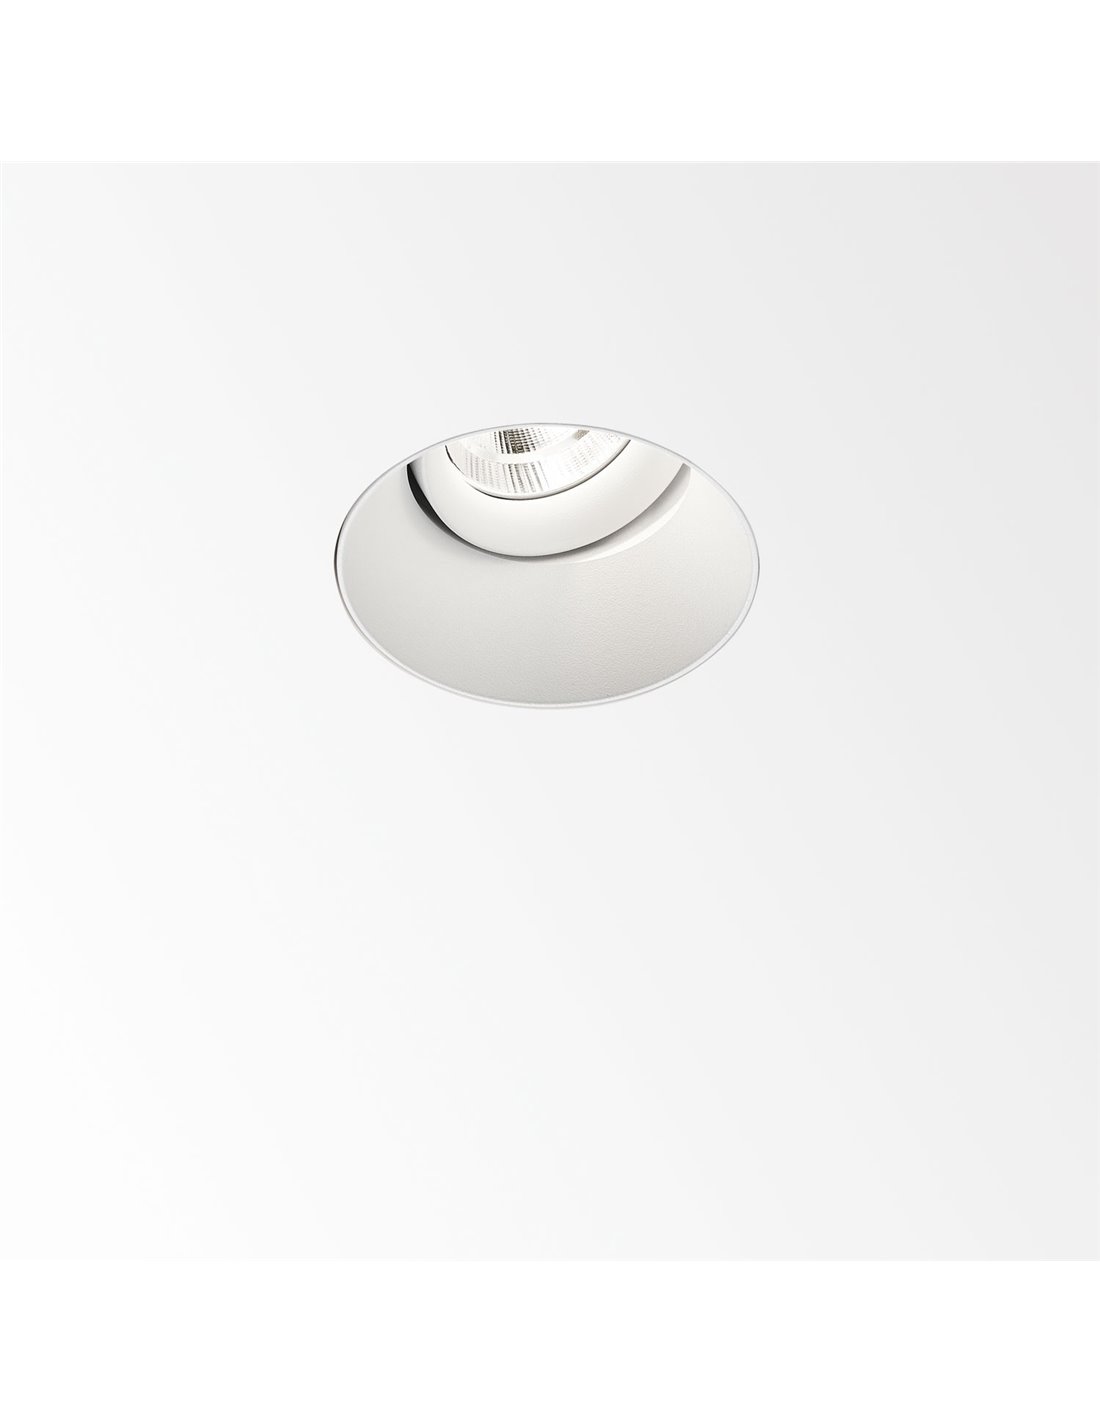 Delta Light DEEP RINGO TRIMLESS OK LED online with professional support.